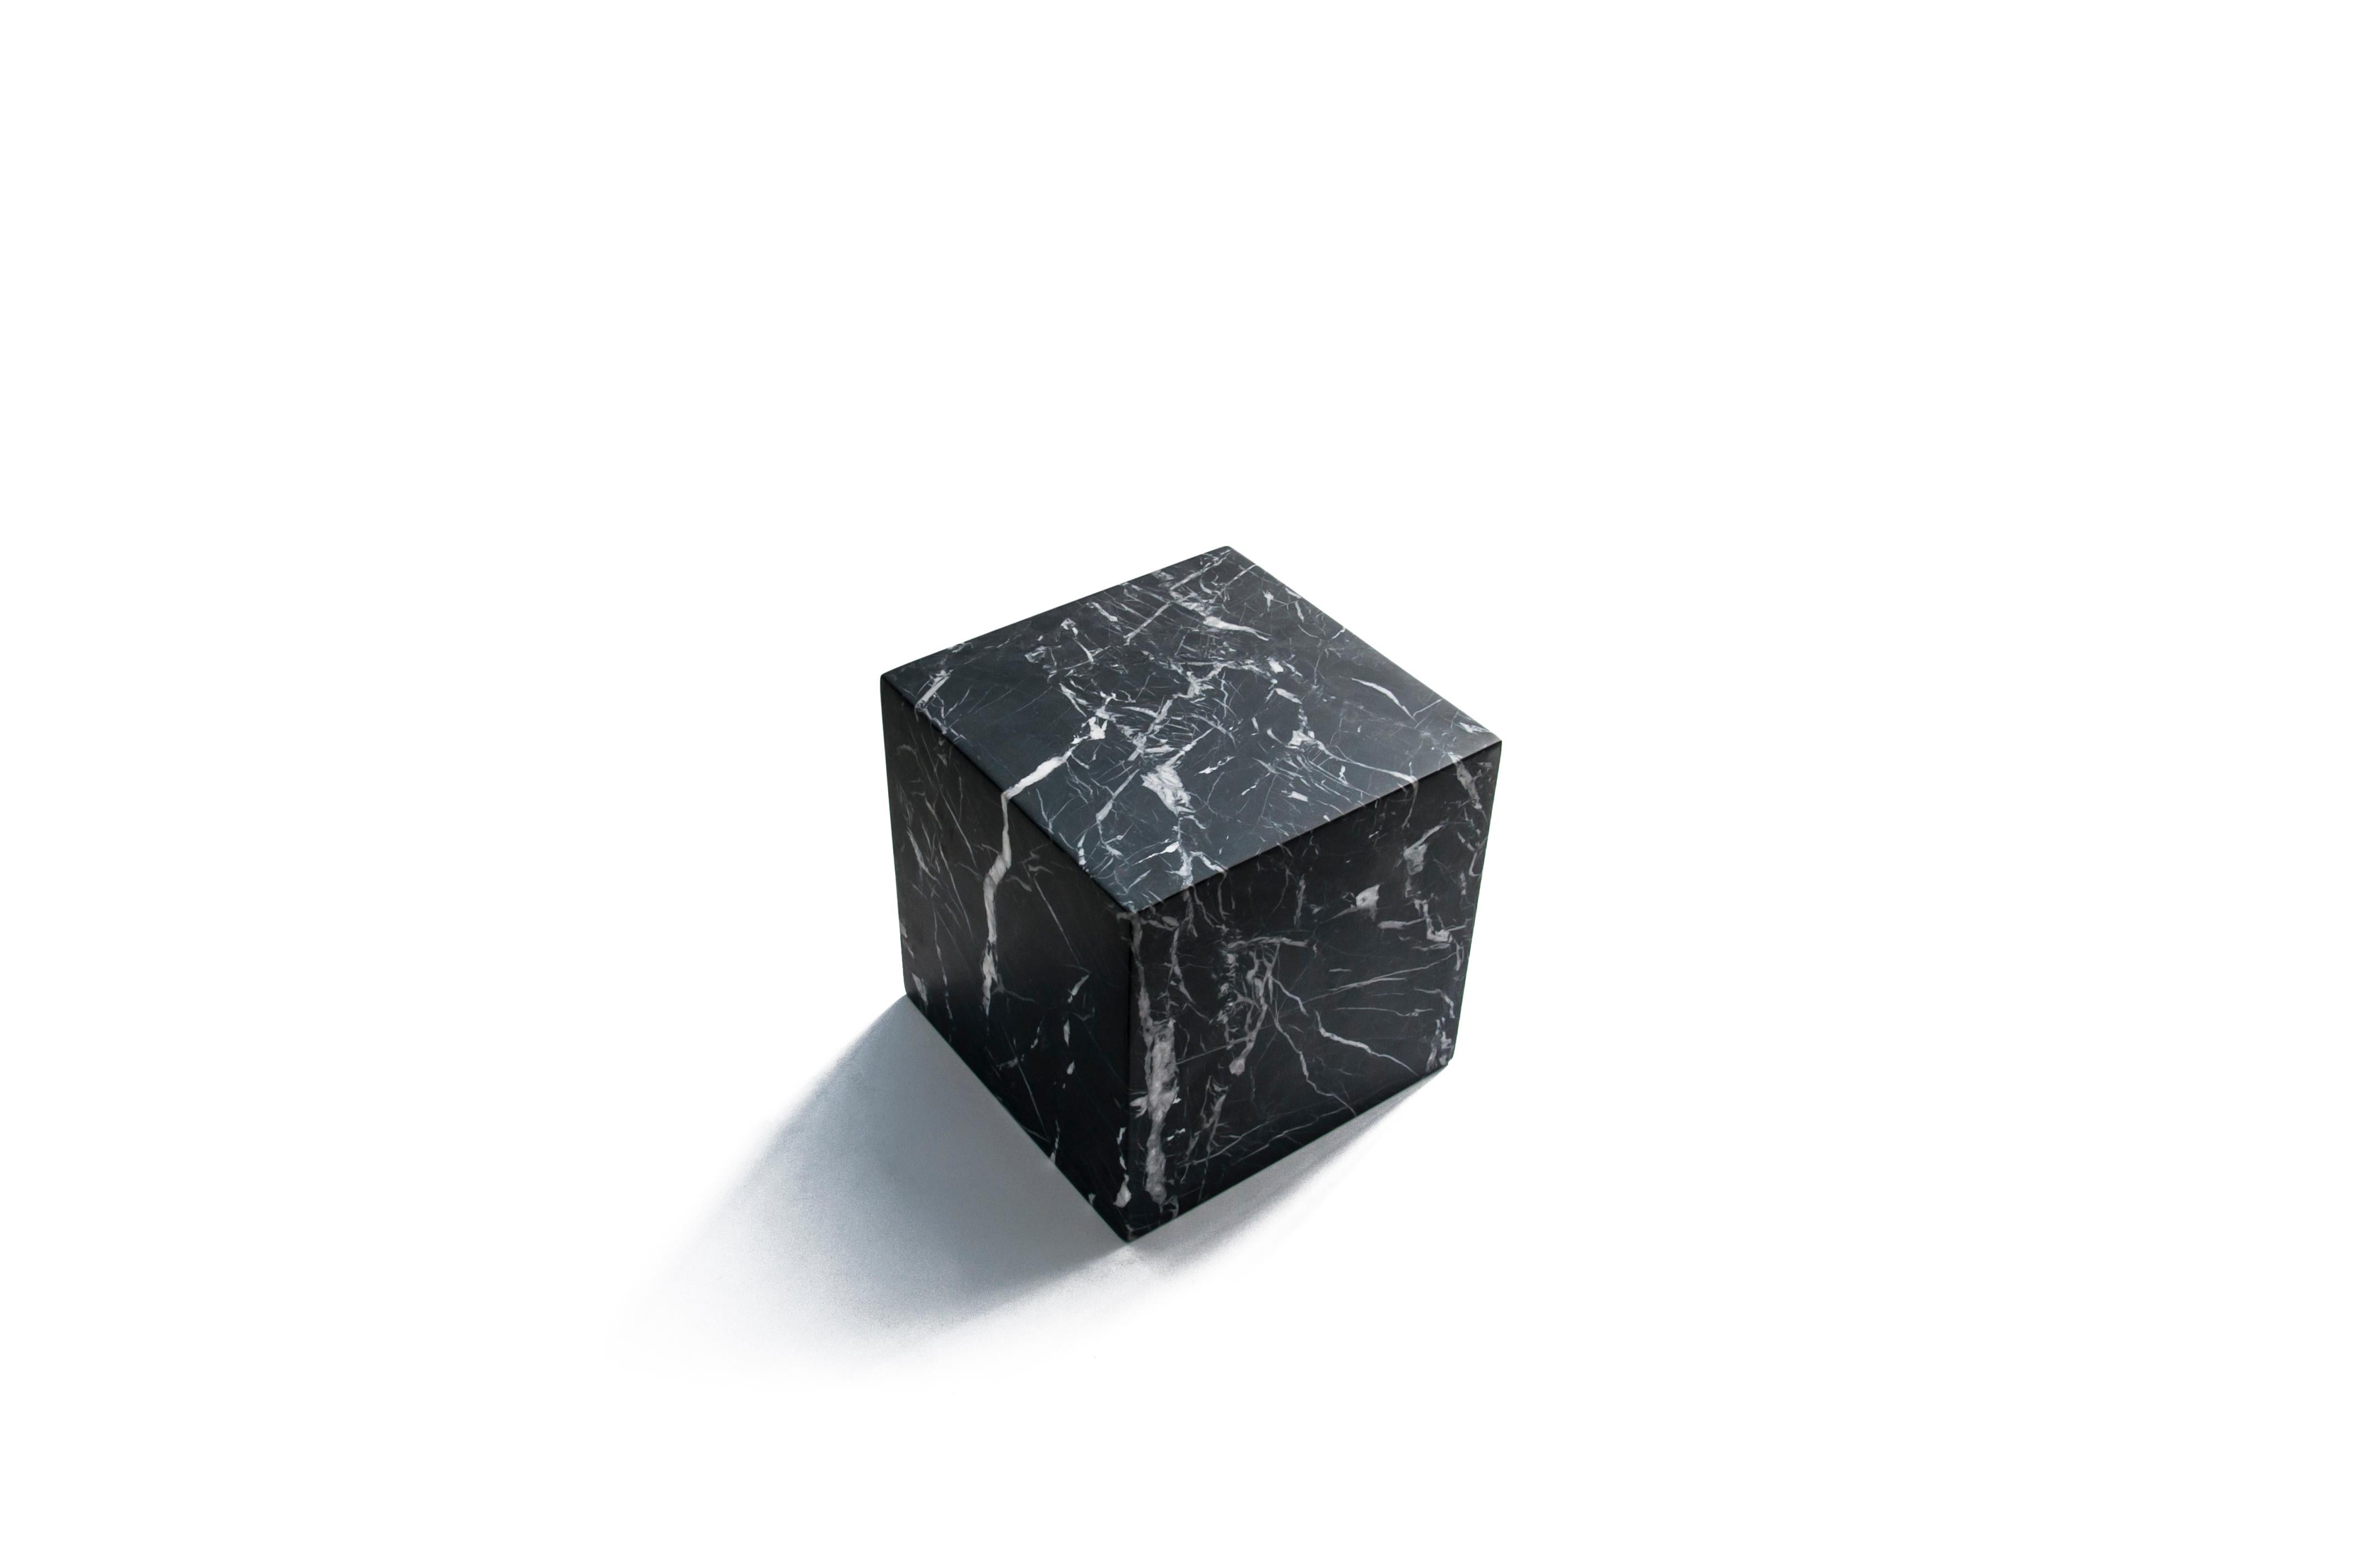 Big decorative paperweight cube full in black Marquina marble. Each piece is in a way unique (every marble block is different in veins and shades) and handmade by Italian artisans specialized over generations in processing marble. Slight variations